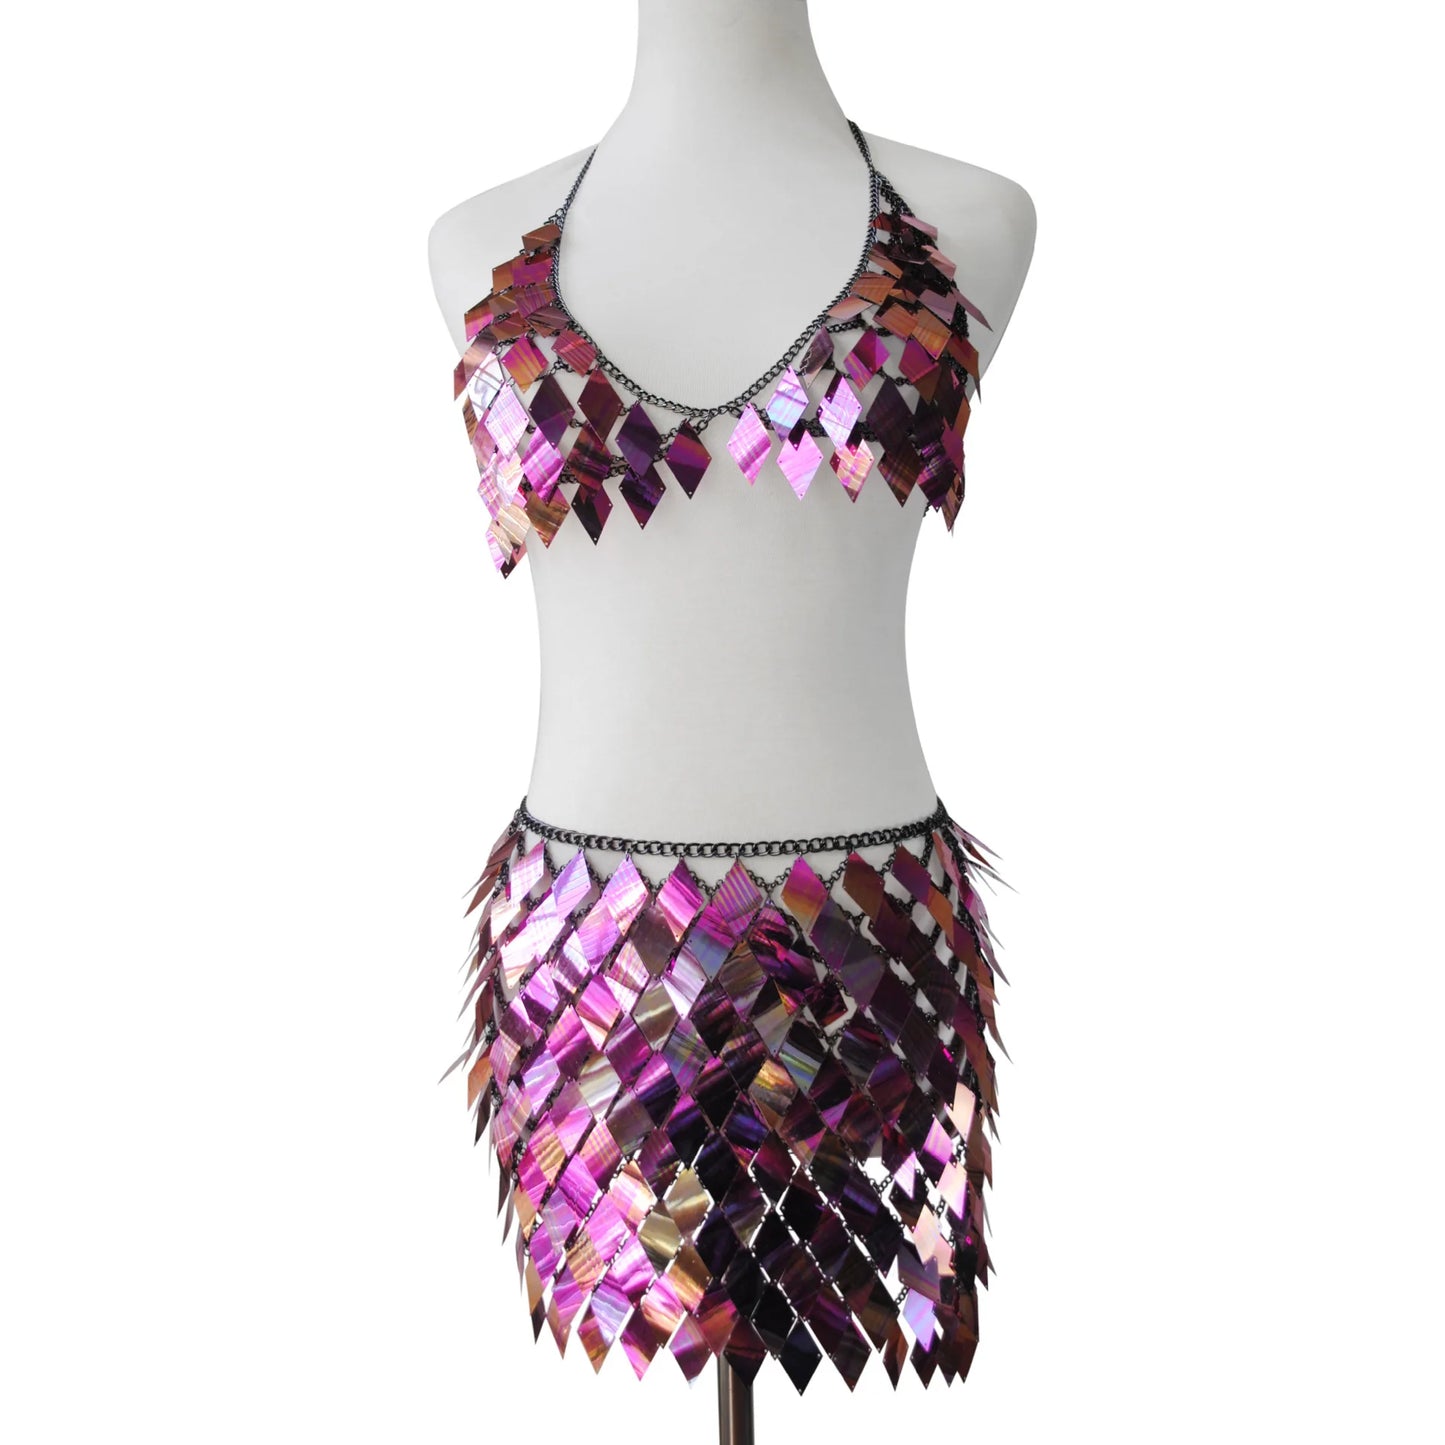 purple Rhombic Metal Backless Skirt and Top Set Festival Outfit Fashion Concert Rave outfits